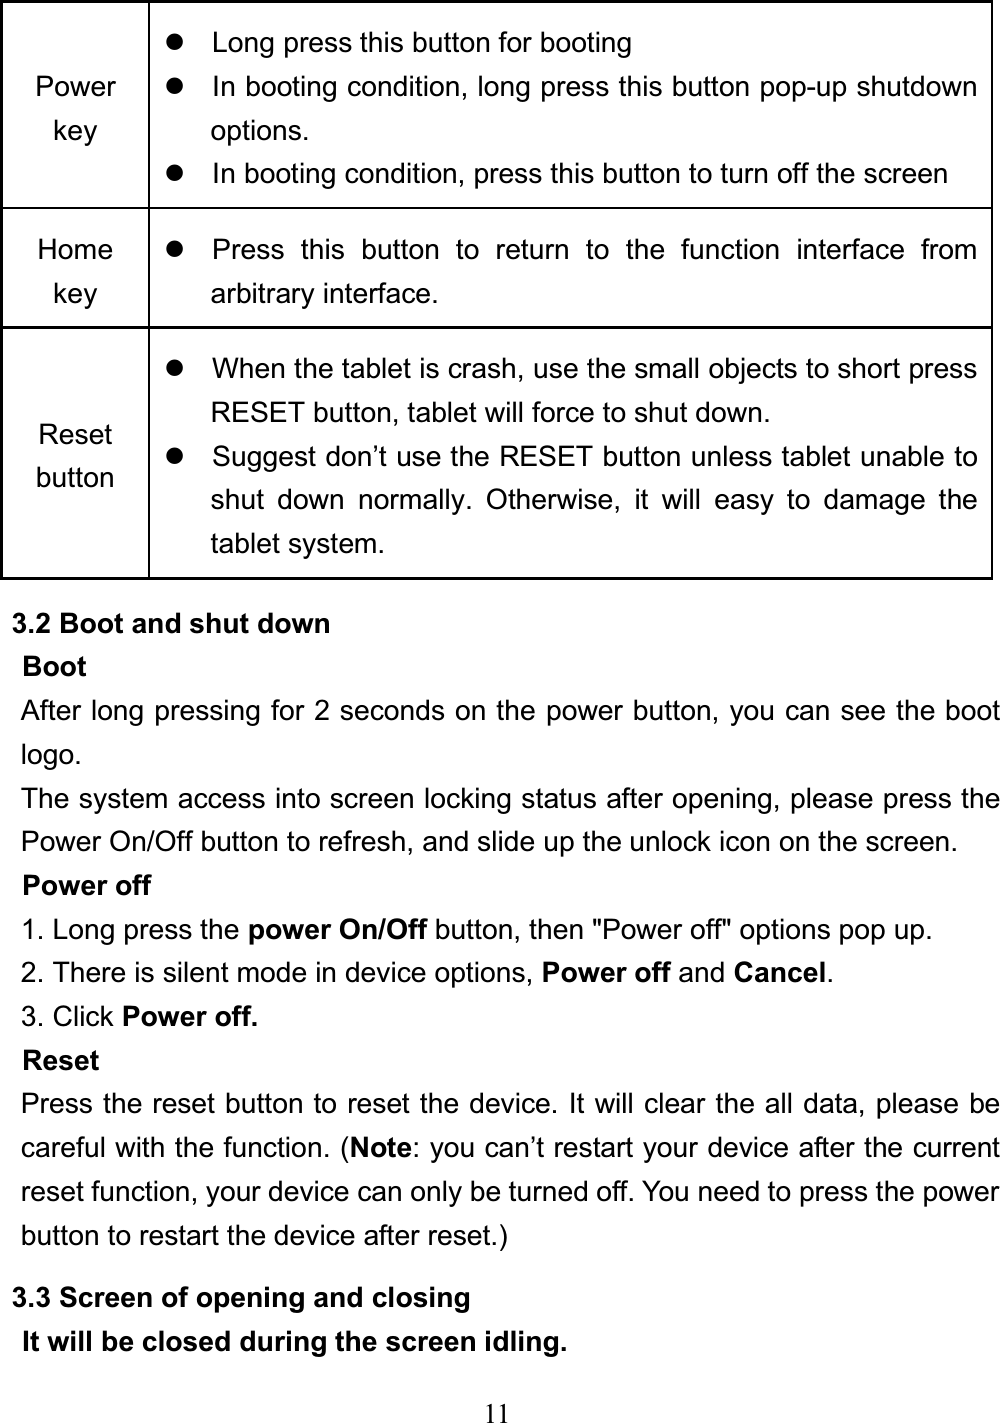 11 Powerkeyz  Long press this button for booting z  In booting condition, long press this button pop-up shutdown options. z  In booting condition, press this button to turn off the screen Home keyz  Press this button to return to the function interface from arbitrary interface. Reset button z  When the tablet is crash, use the small objects to short press RESET button, tablet will force to shut down. z  Suggest don’t use the RESET button unless tablet unable to shut down normally. Otherwise, it will easy to damage the tablet system. 3.2 Boot and shut down Boot After long pressing for 2 seconds on the power button, you can see the boot logo. The system access into screen locking status after opening, please press the Power On/Off button to refresh, and slide up the unlock icon on the screen. Power off 1. Long press the power On/Off button, then &quot;Power off&quot; options pop up. 2. There is silent mode in device options, Power off and Cancel.3. Click Power off.ResetPress the reset button to reset the device. It will clear the all data, please be careful with the function. (Note: you can’t restart your device after the current reset function, your device can only be turned off. You need to press the power button to restart the device after reset.)3.3 Screen of opening and closing It will be closed during the screen idling. 